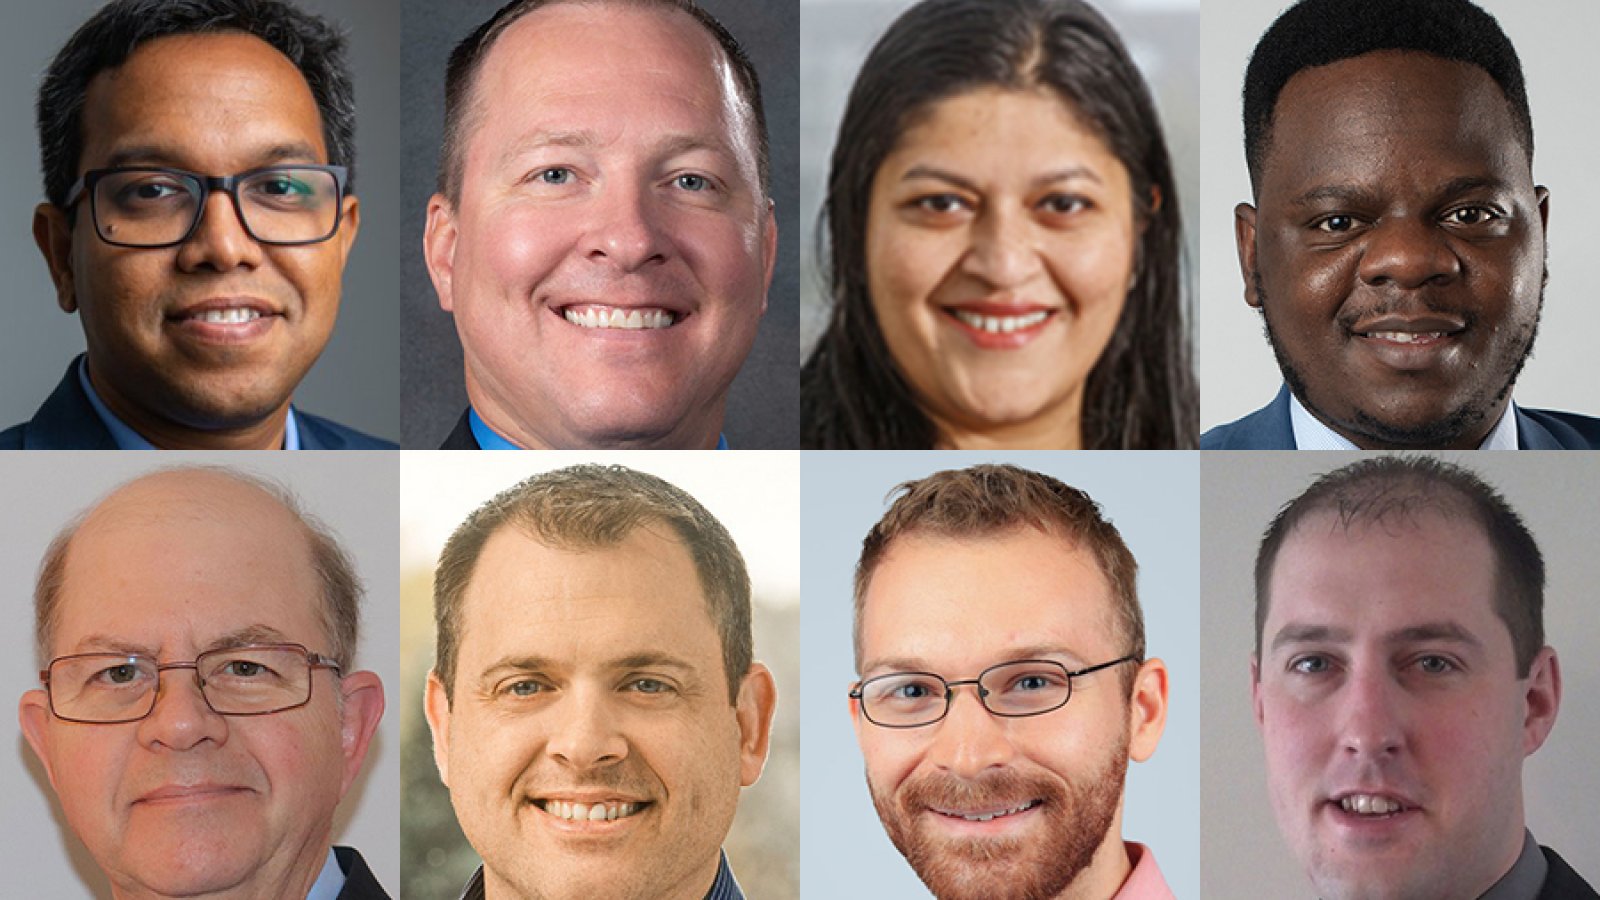 Eight new faculty joined the College of Engineering in the fall semester 2023 - (clockwise from top left) Nirupam Aich, Jeffrey Falkinburg, Bhuvaneswari Gopal, Abia Katimbo, Craig Zuhlke, Seth Polsley, Andre Messner and Neal Lewis.